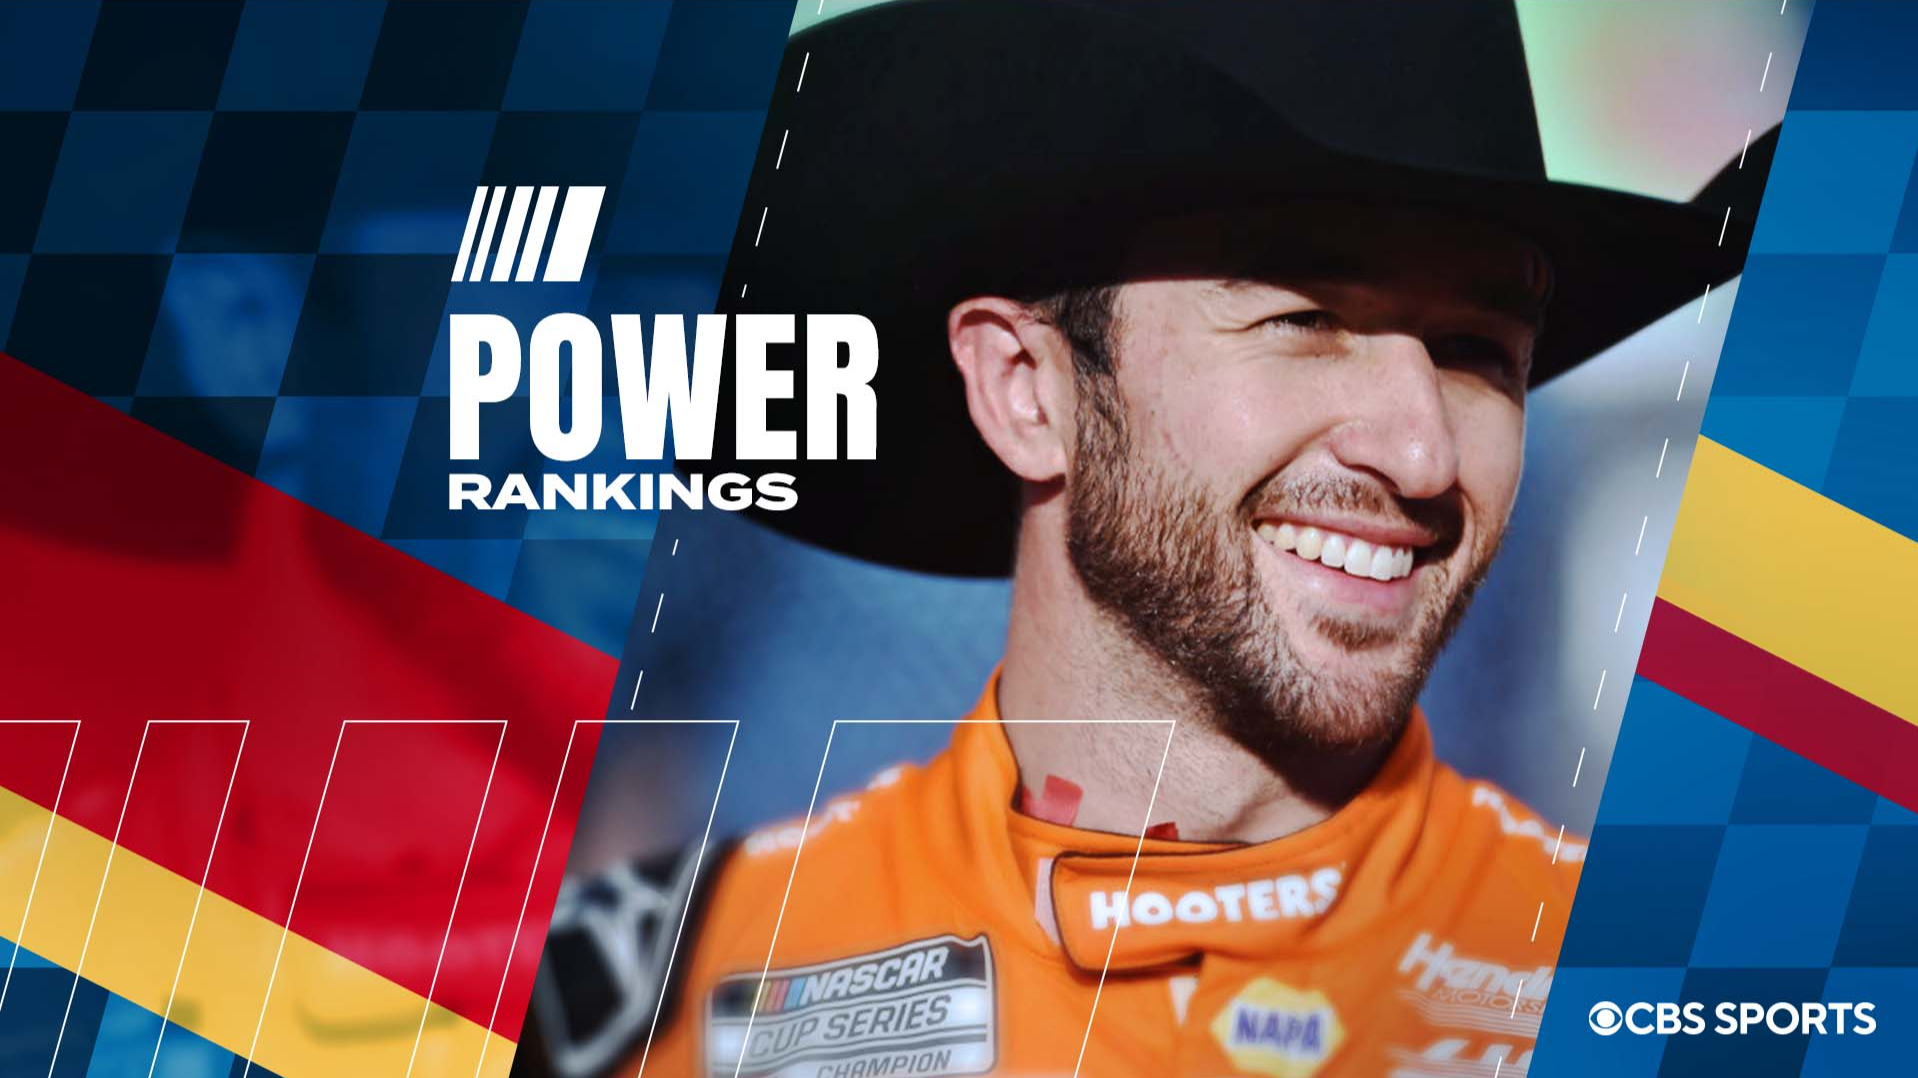 NASCAR Power Rankings: Tyler Reddick moves up into top five after his Talladega win